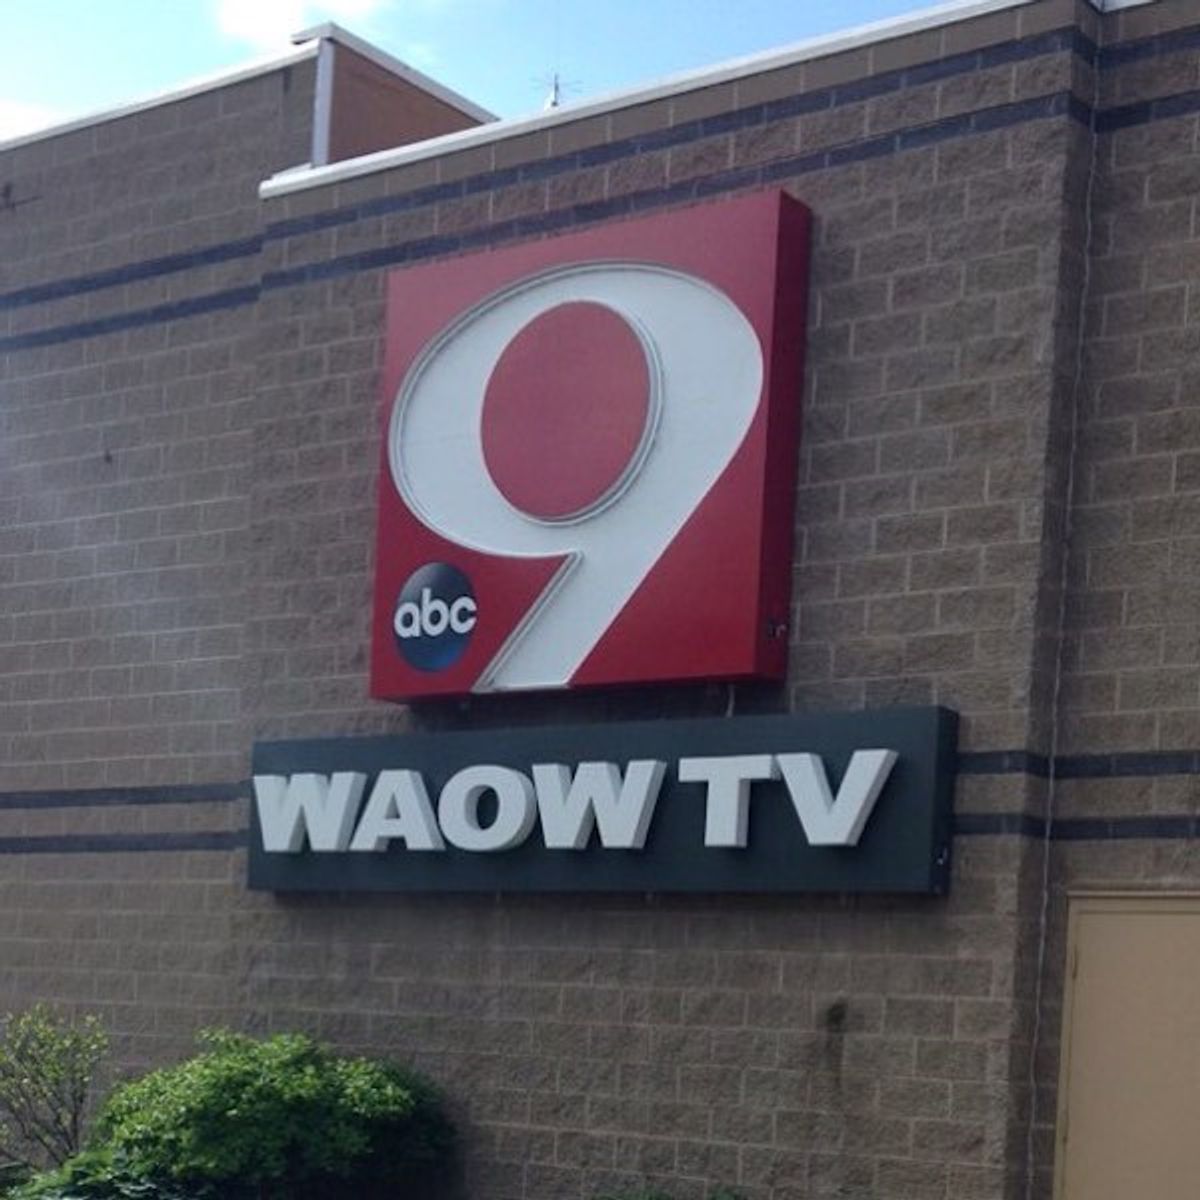 Give Them A Break: What I Learned From My Summer At A News Station